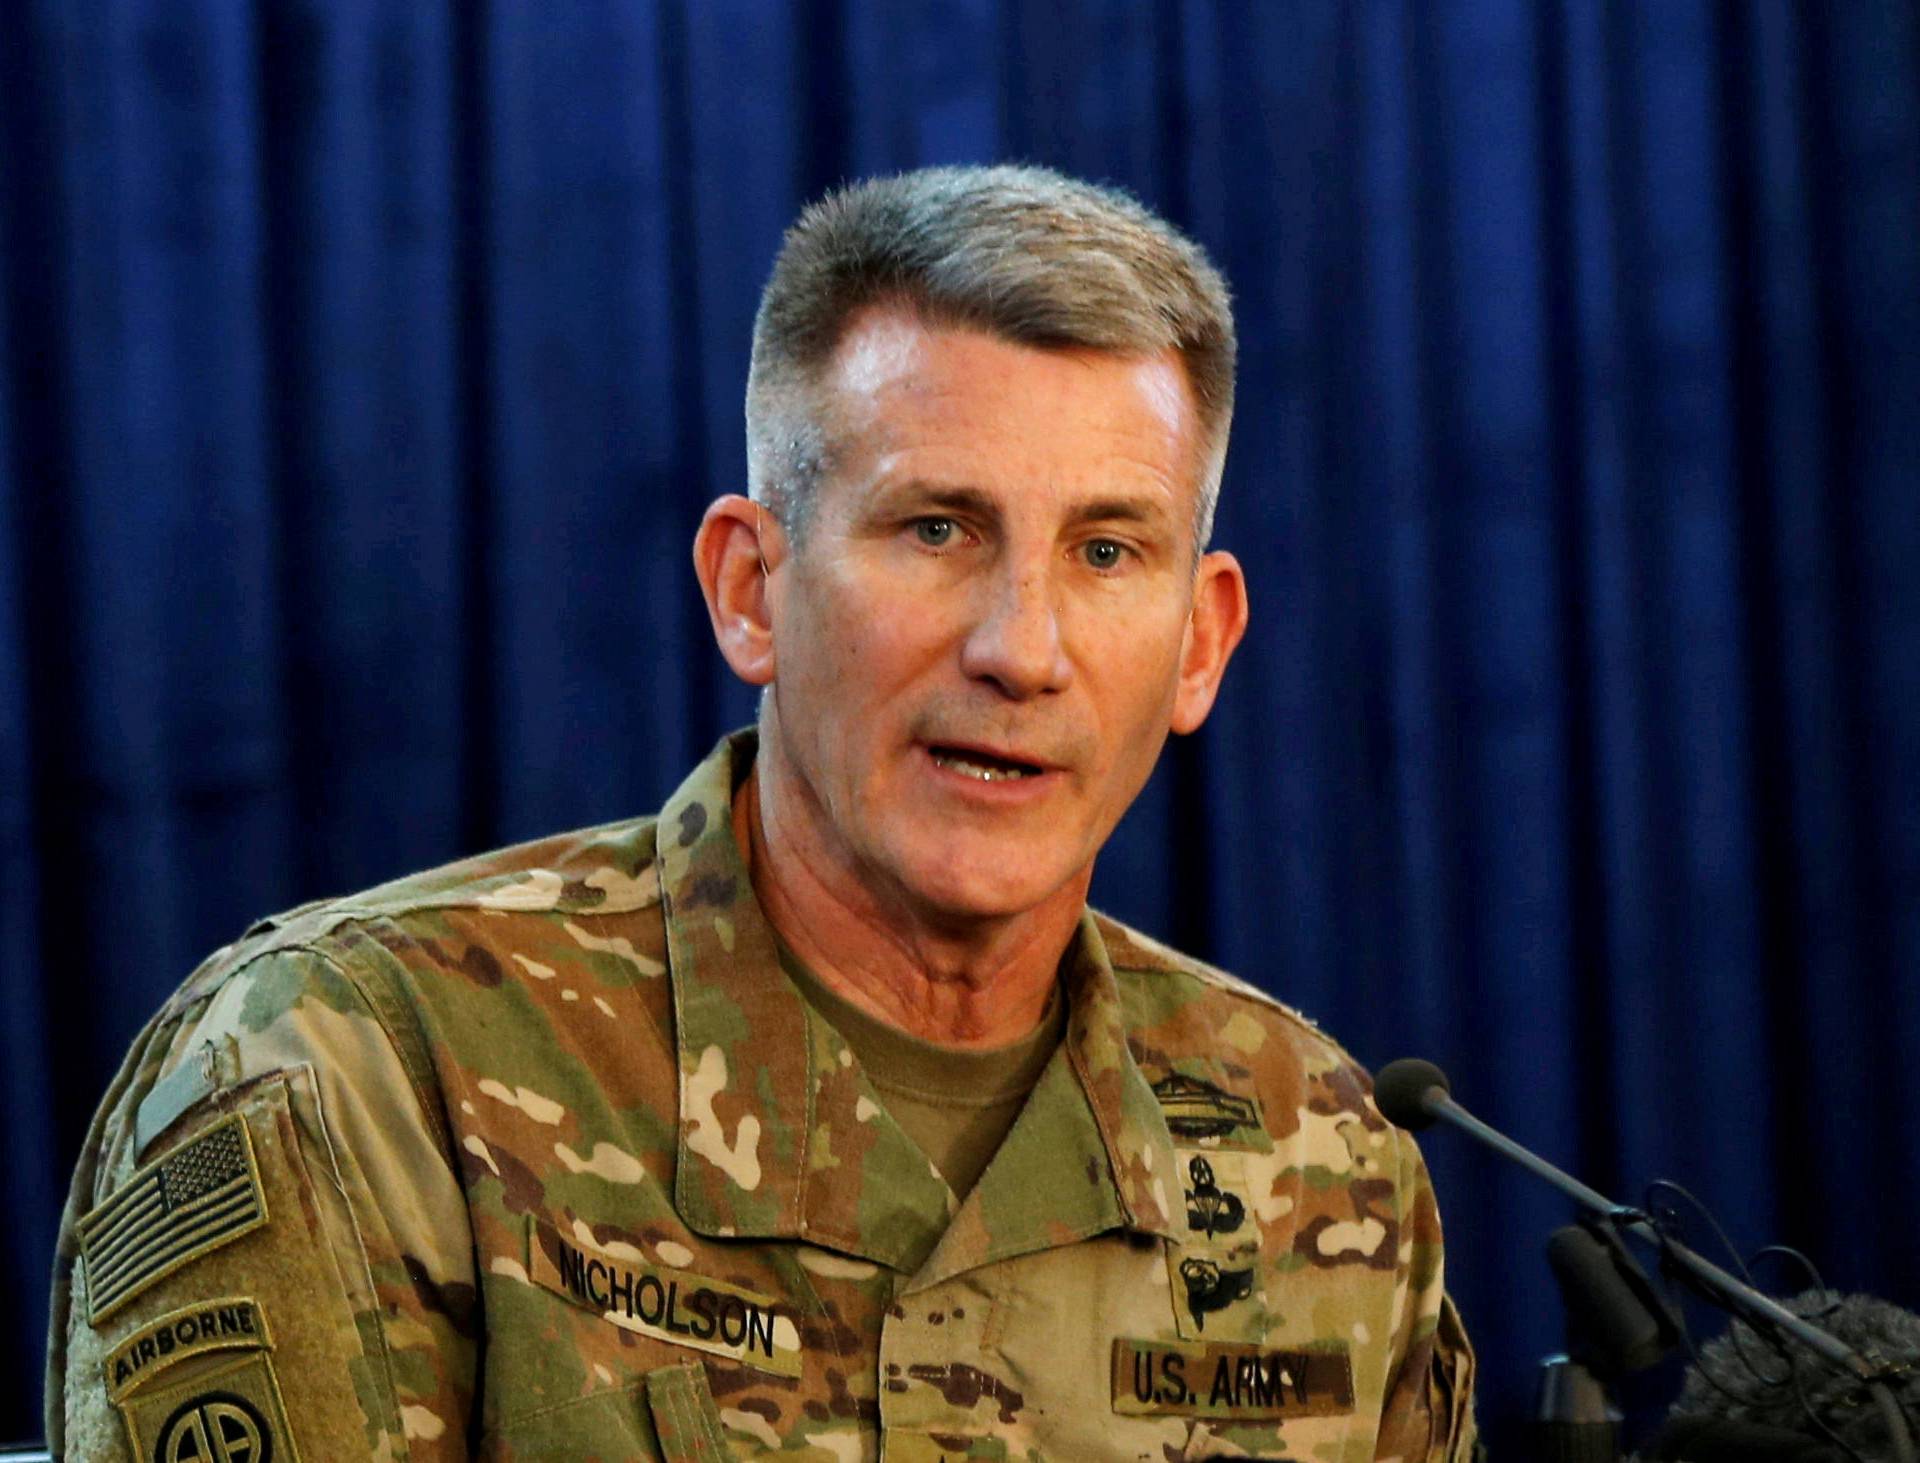 FILE PHOTO: U.S. Army General John Nicholson, Commander of Resolute Support forces and U.S. forces in Afghanistan, speaks during a news conference in Kabul